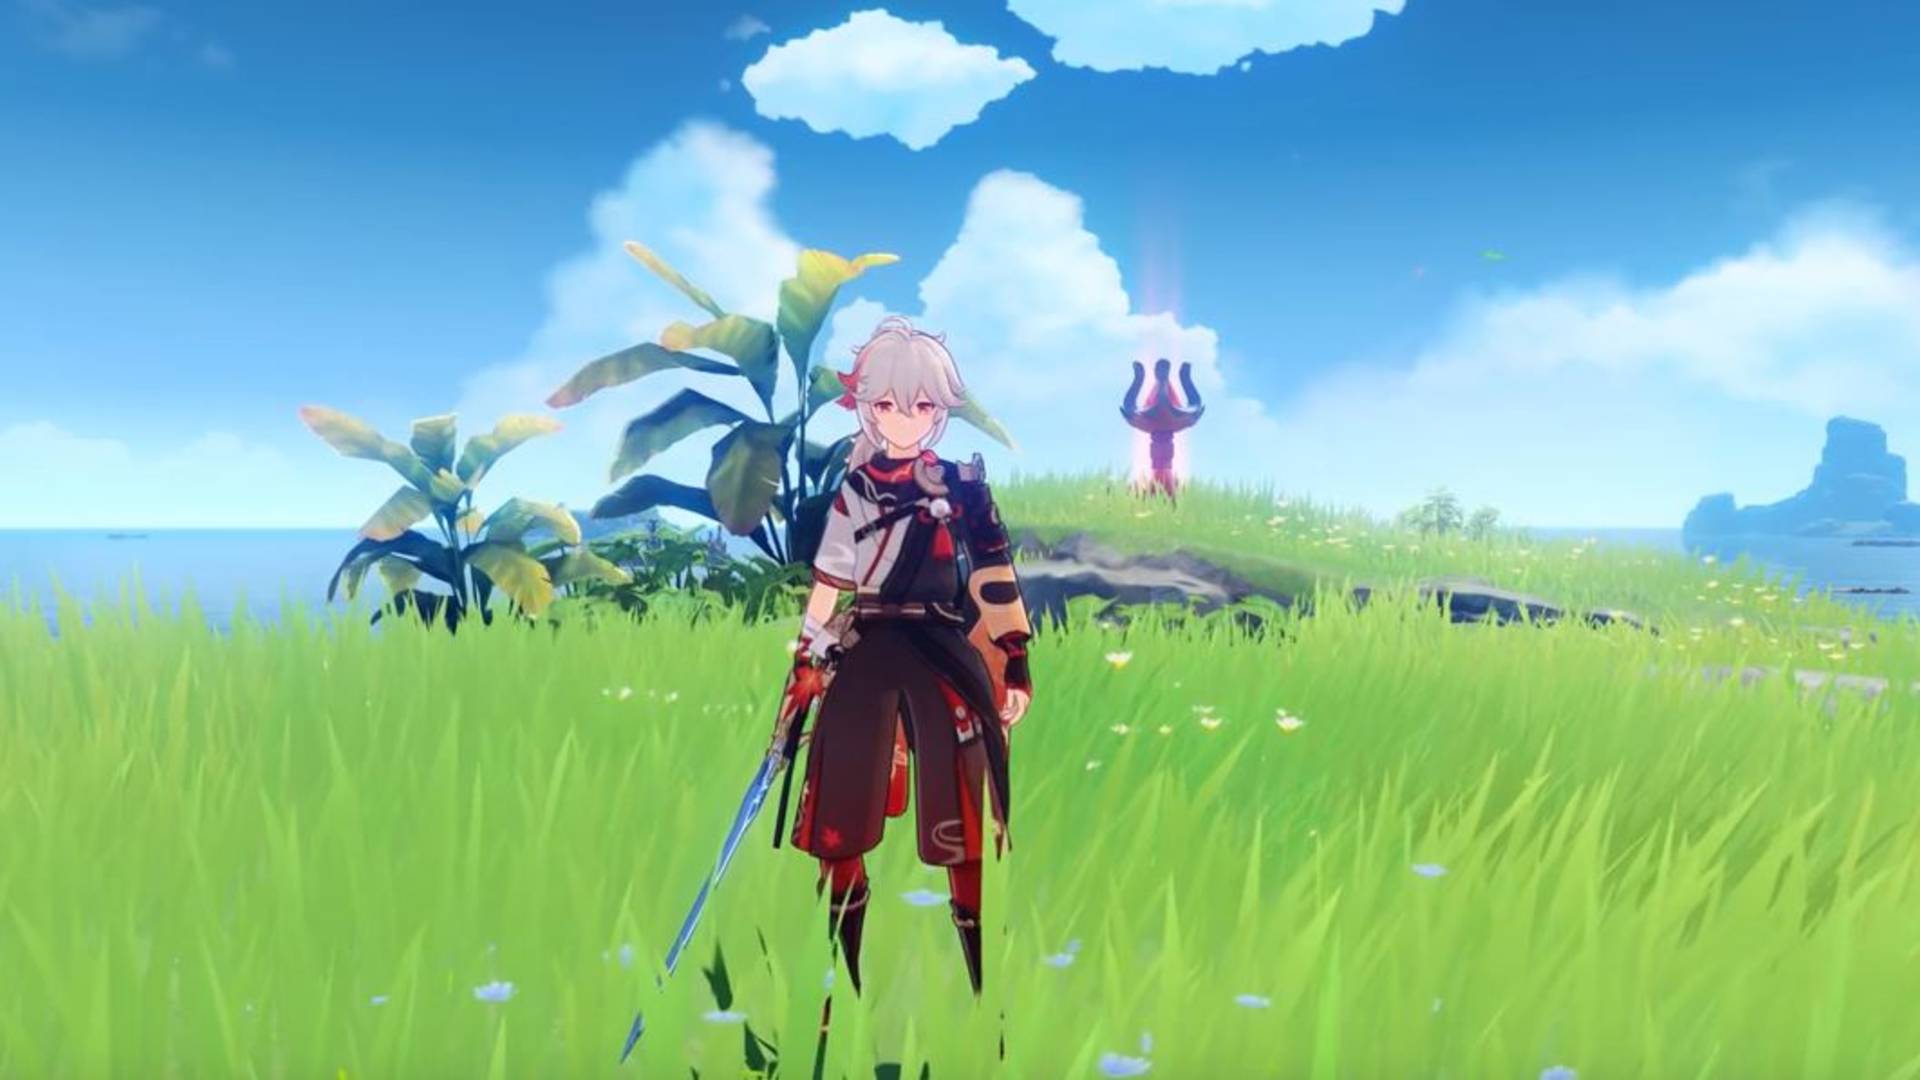 The best anime games: A character from Genshin impact wears deep red clothes and holds a sword in long, green grass.